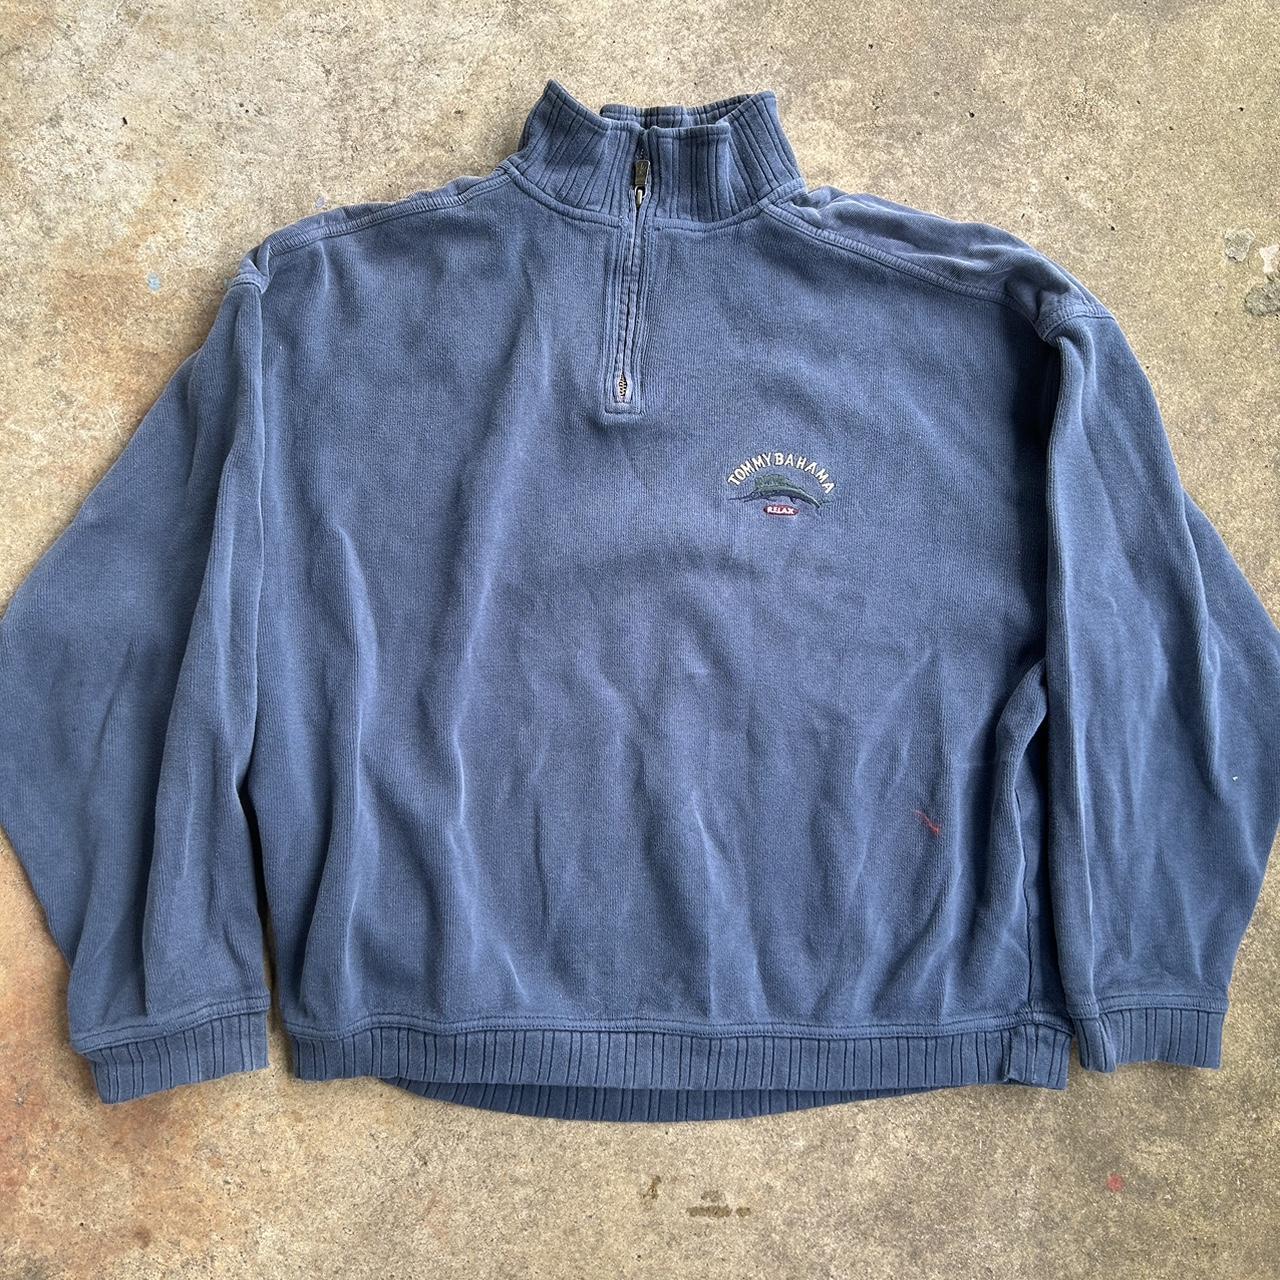 item listed by buzzcutthrift